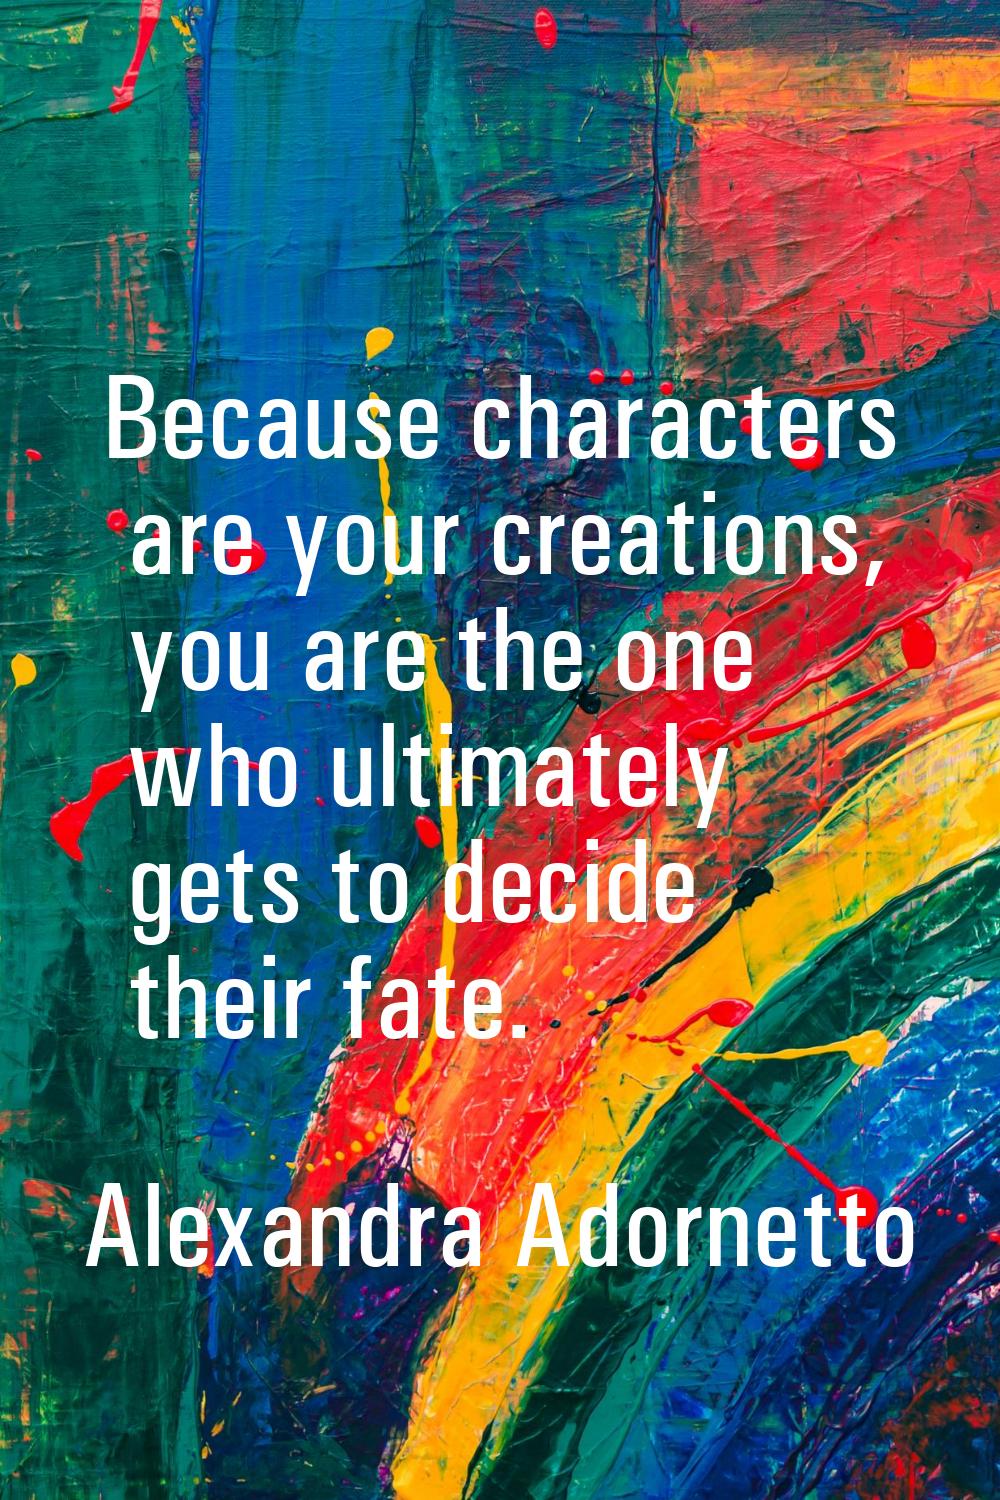 Because characters are your creations, you are the one who ultimately gets to decide their fate.